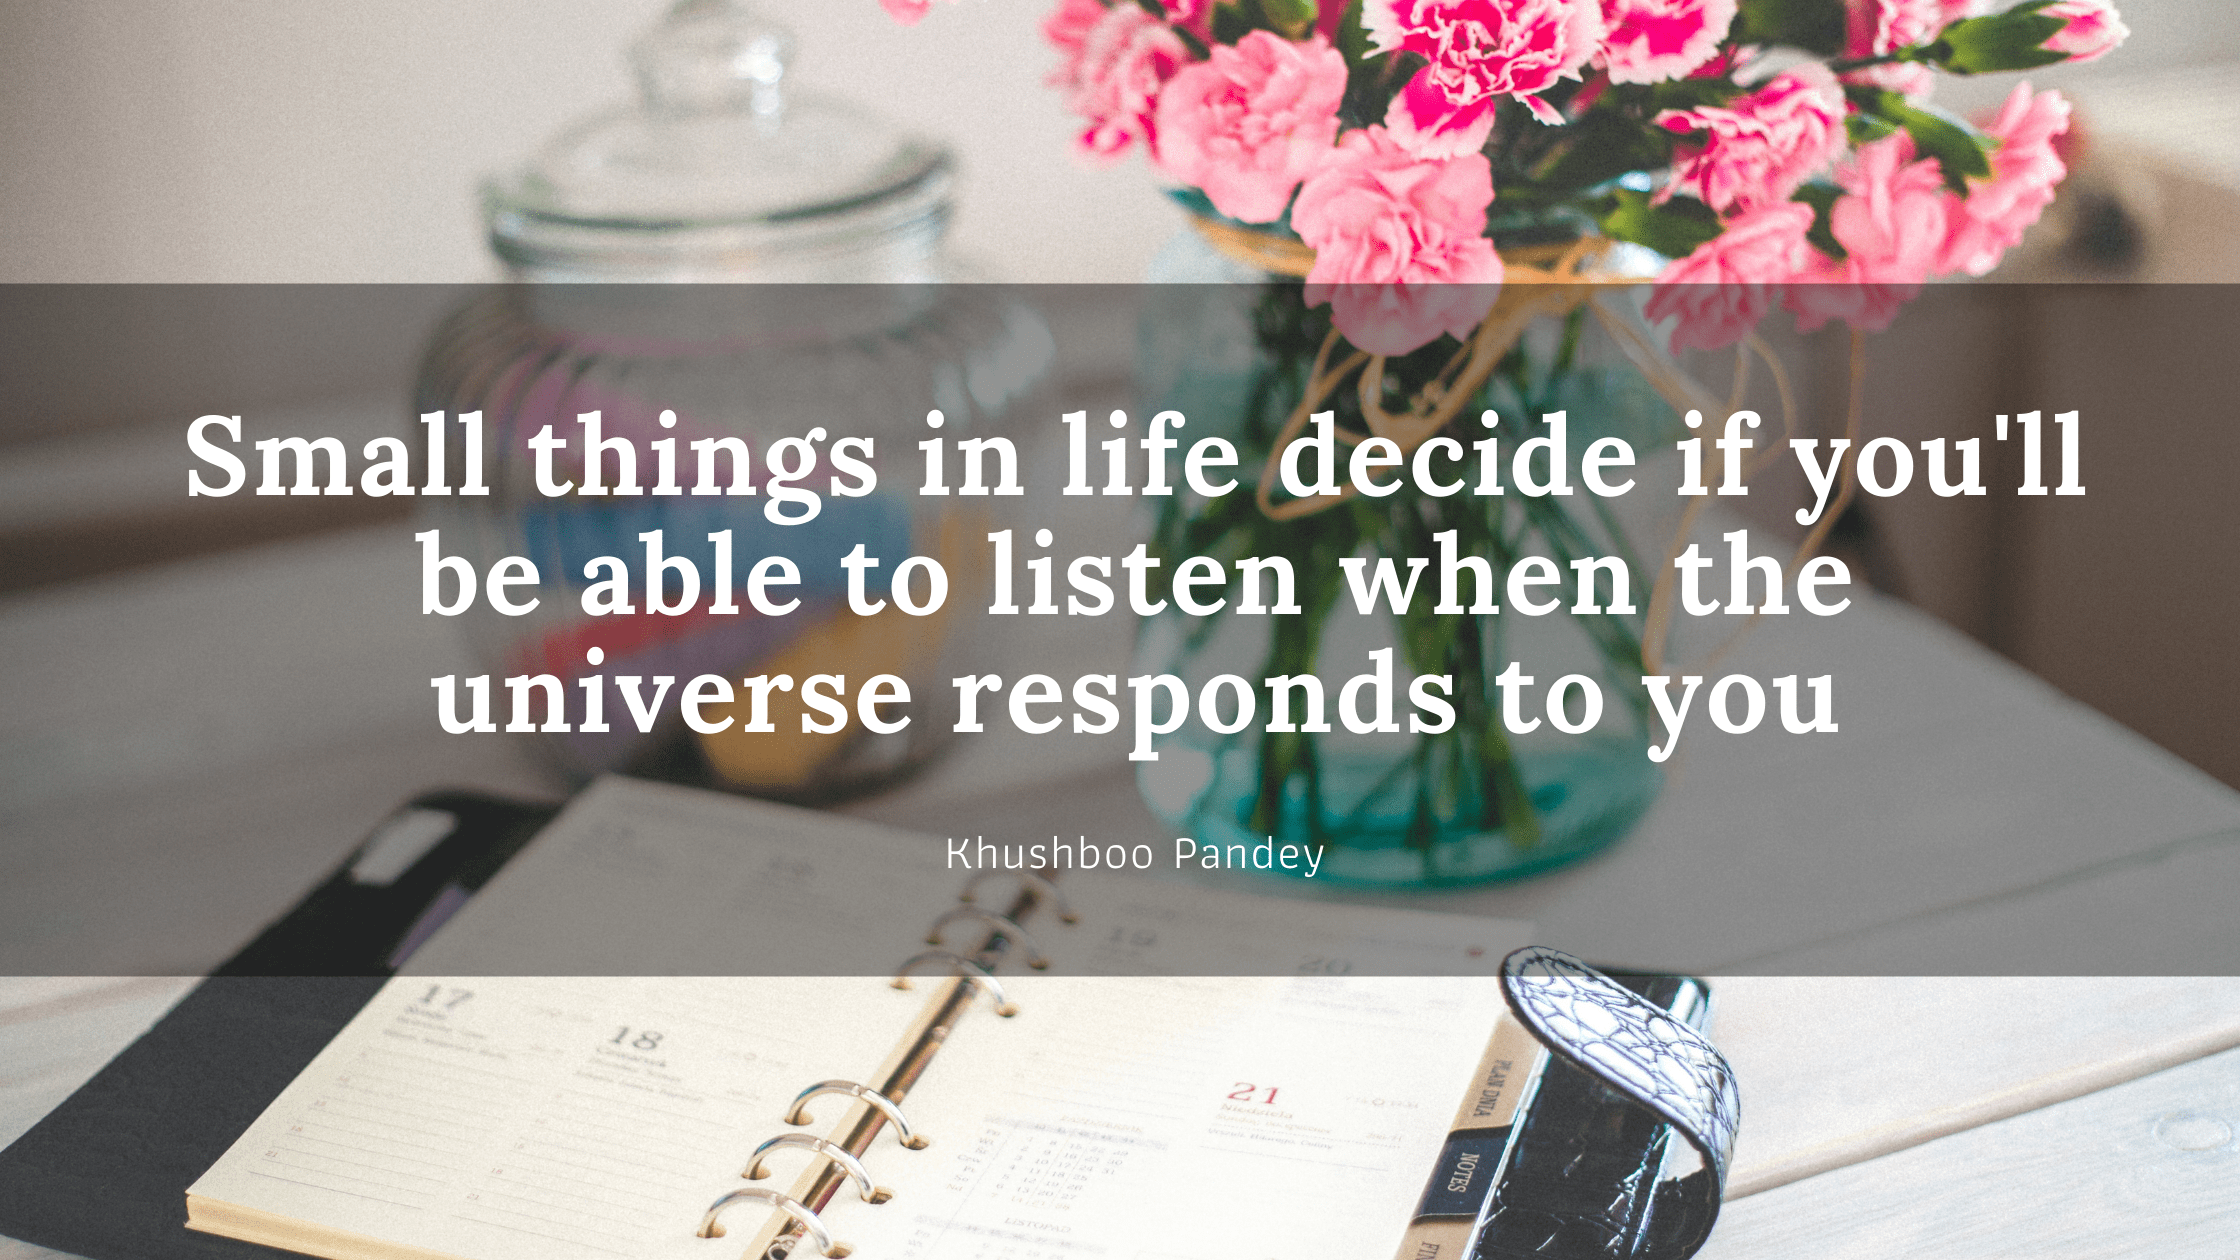 small things in life decide if youll be able to listen when the universe responds to you